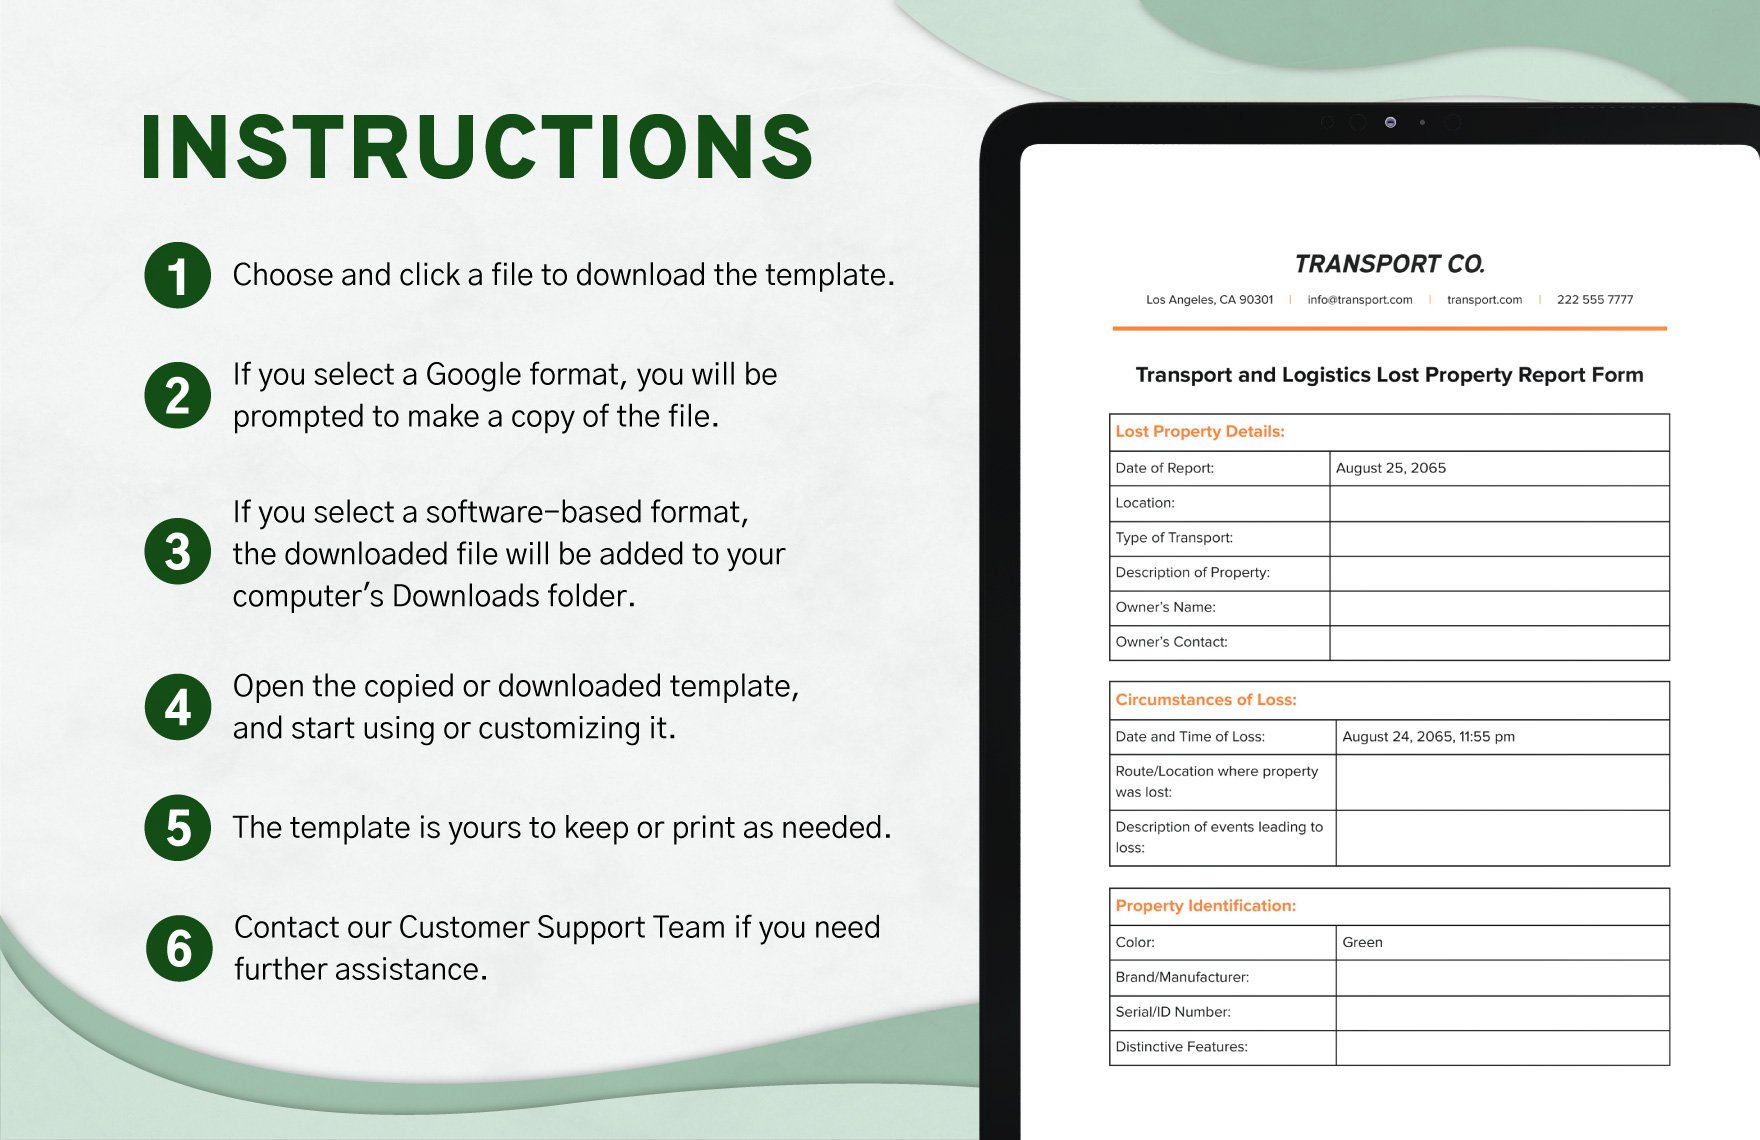 Transport and Logistics Lost Property Report Form Template